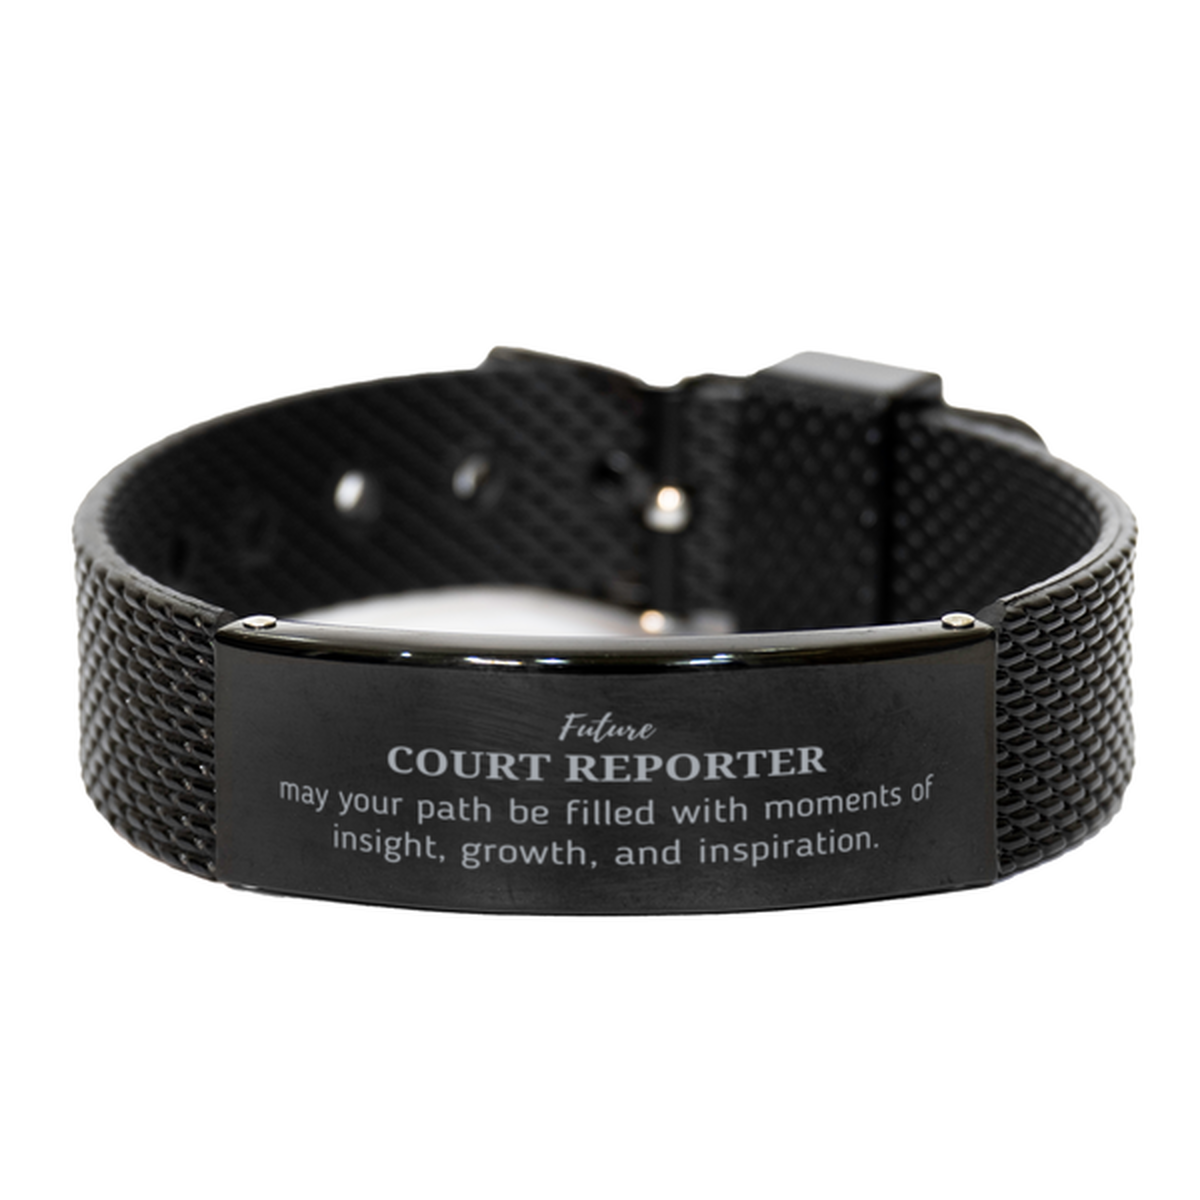 Future Court Reporter Gifts, May your path be filled with moments of insight, Graduation Gifts for New Court Reporter, Christmas Unique Black Shark Mesh Bracelet For Men, Women, Friends